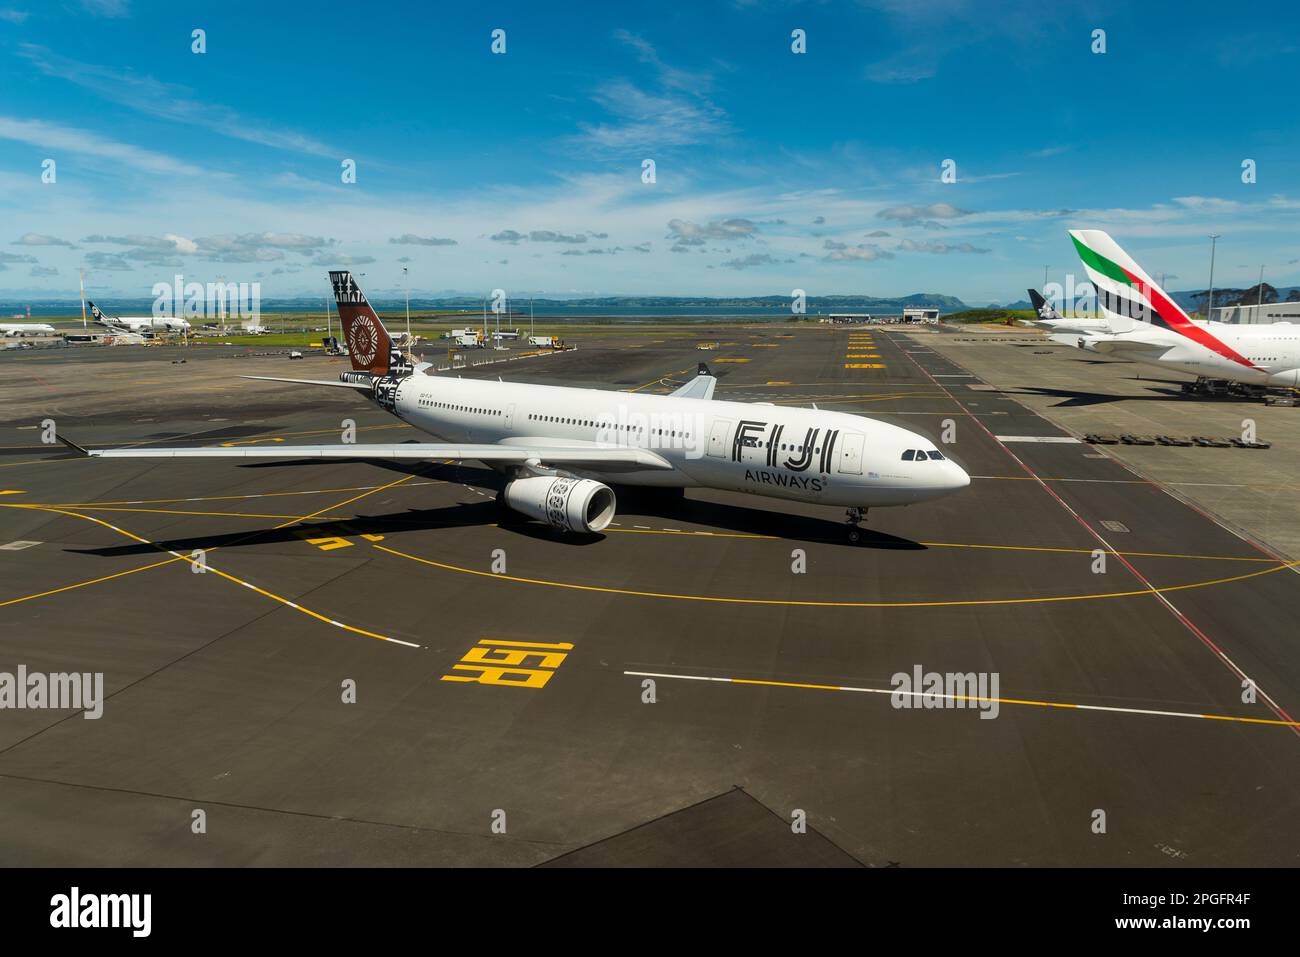 Fiji Airways Airbus A330 airliner jet plane DQ-FJV taxiing to stand at Auckland Airport, New Zealand. Taxiway markings to gate Stock Photo